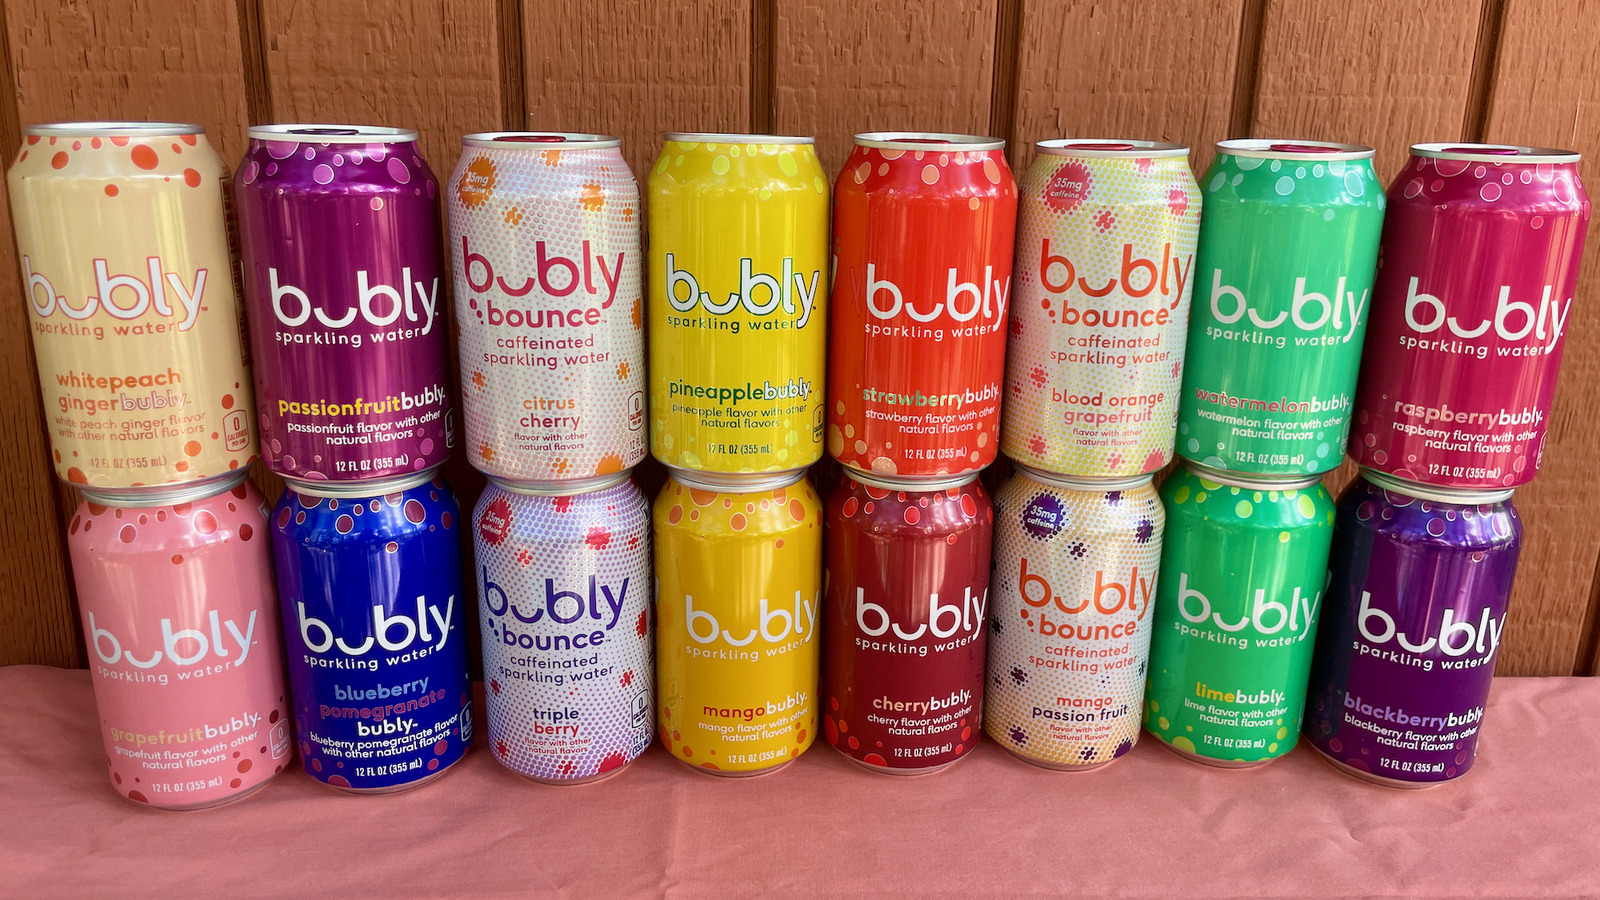 Ranking 21 Bubly Flavors From Worst To Best